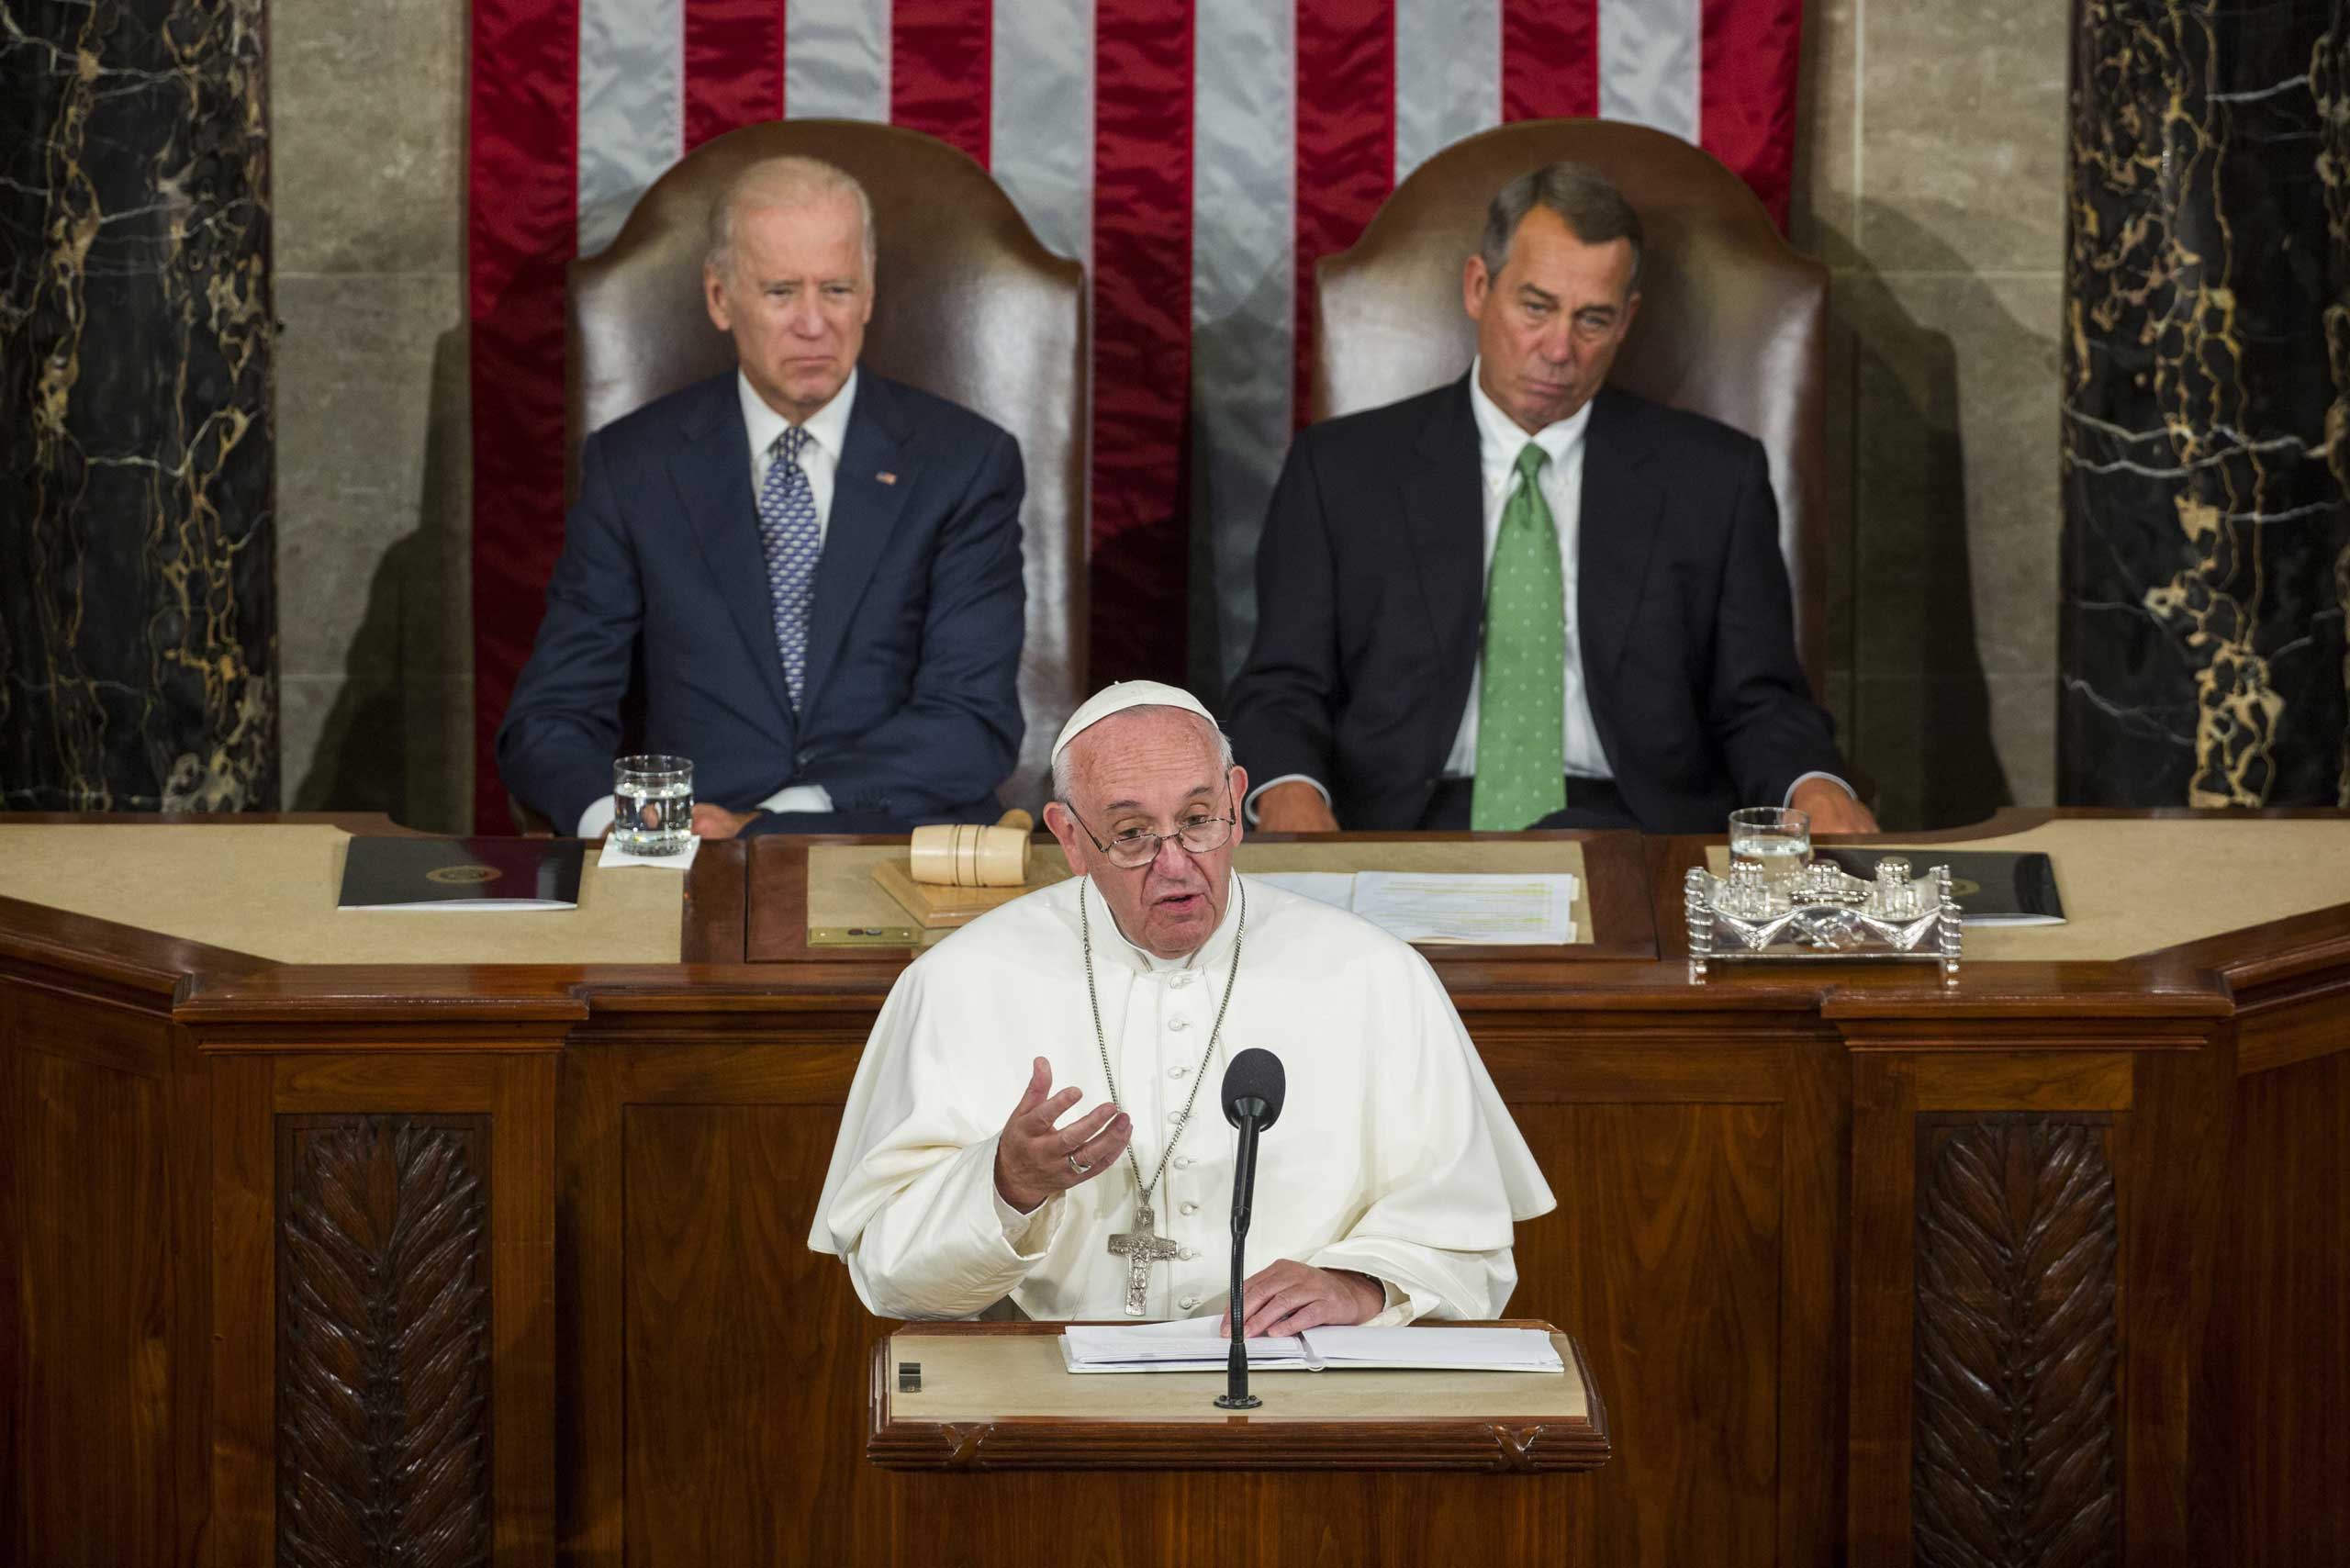 <b>Pope Francis</b>, addressed a joint meeting of the U.S. Congress with with Vice President Joe Biden and Speaker of the House John Boehner in the House Chamber of the U.S. Capitol in Washington, on Sept. 24, 2015, urging legislators to work together to solve problems and avoid polarization (Jim Lo Scalzo—EPA)